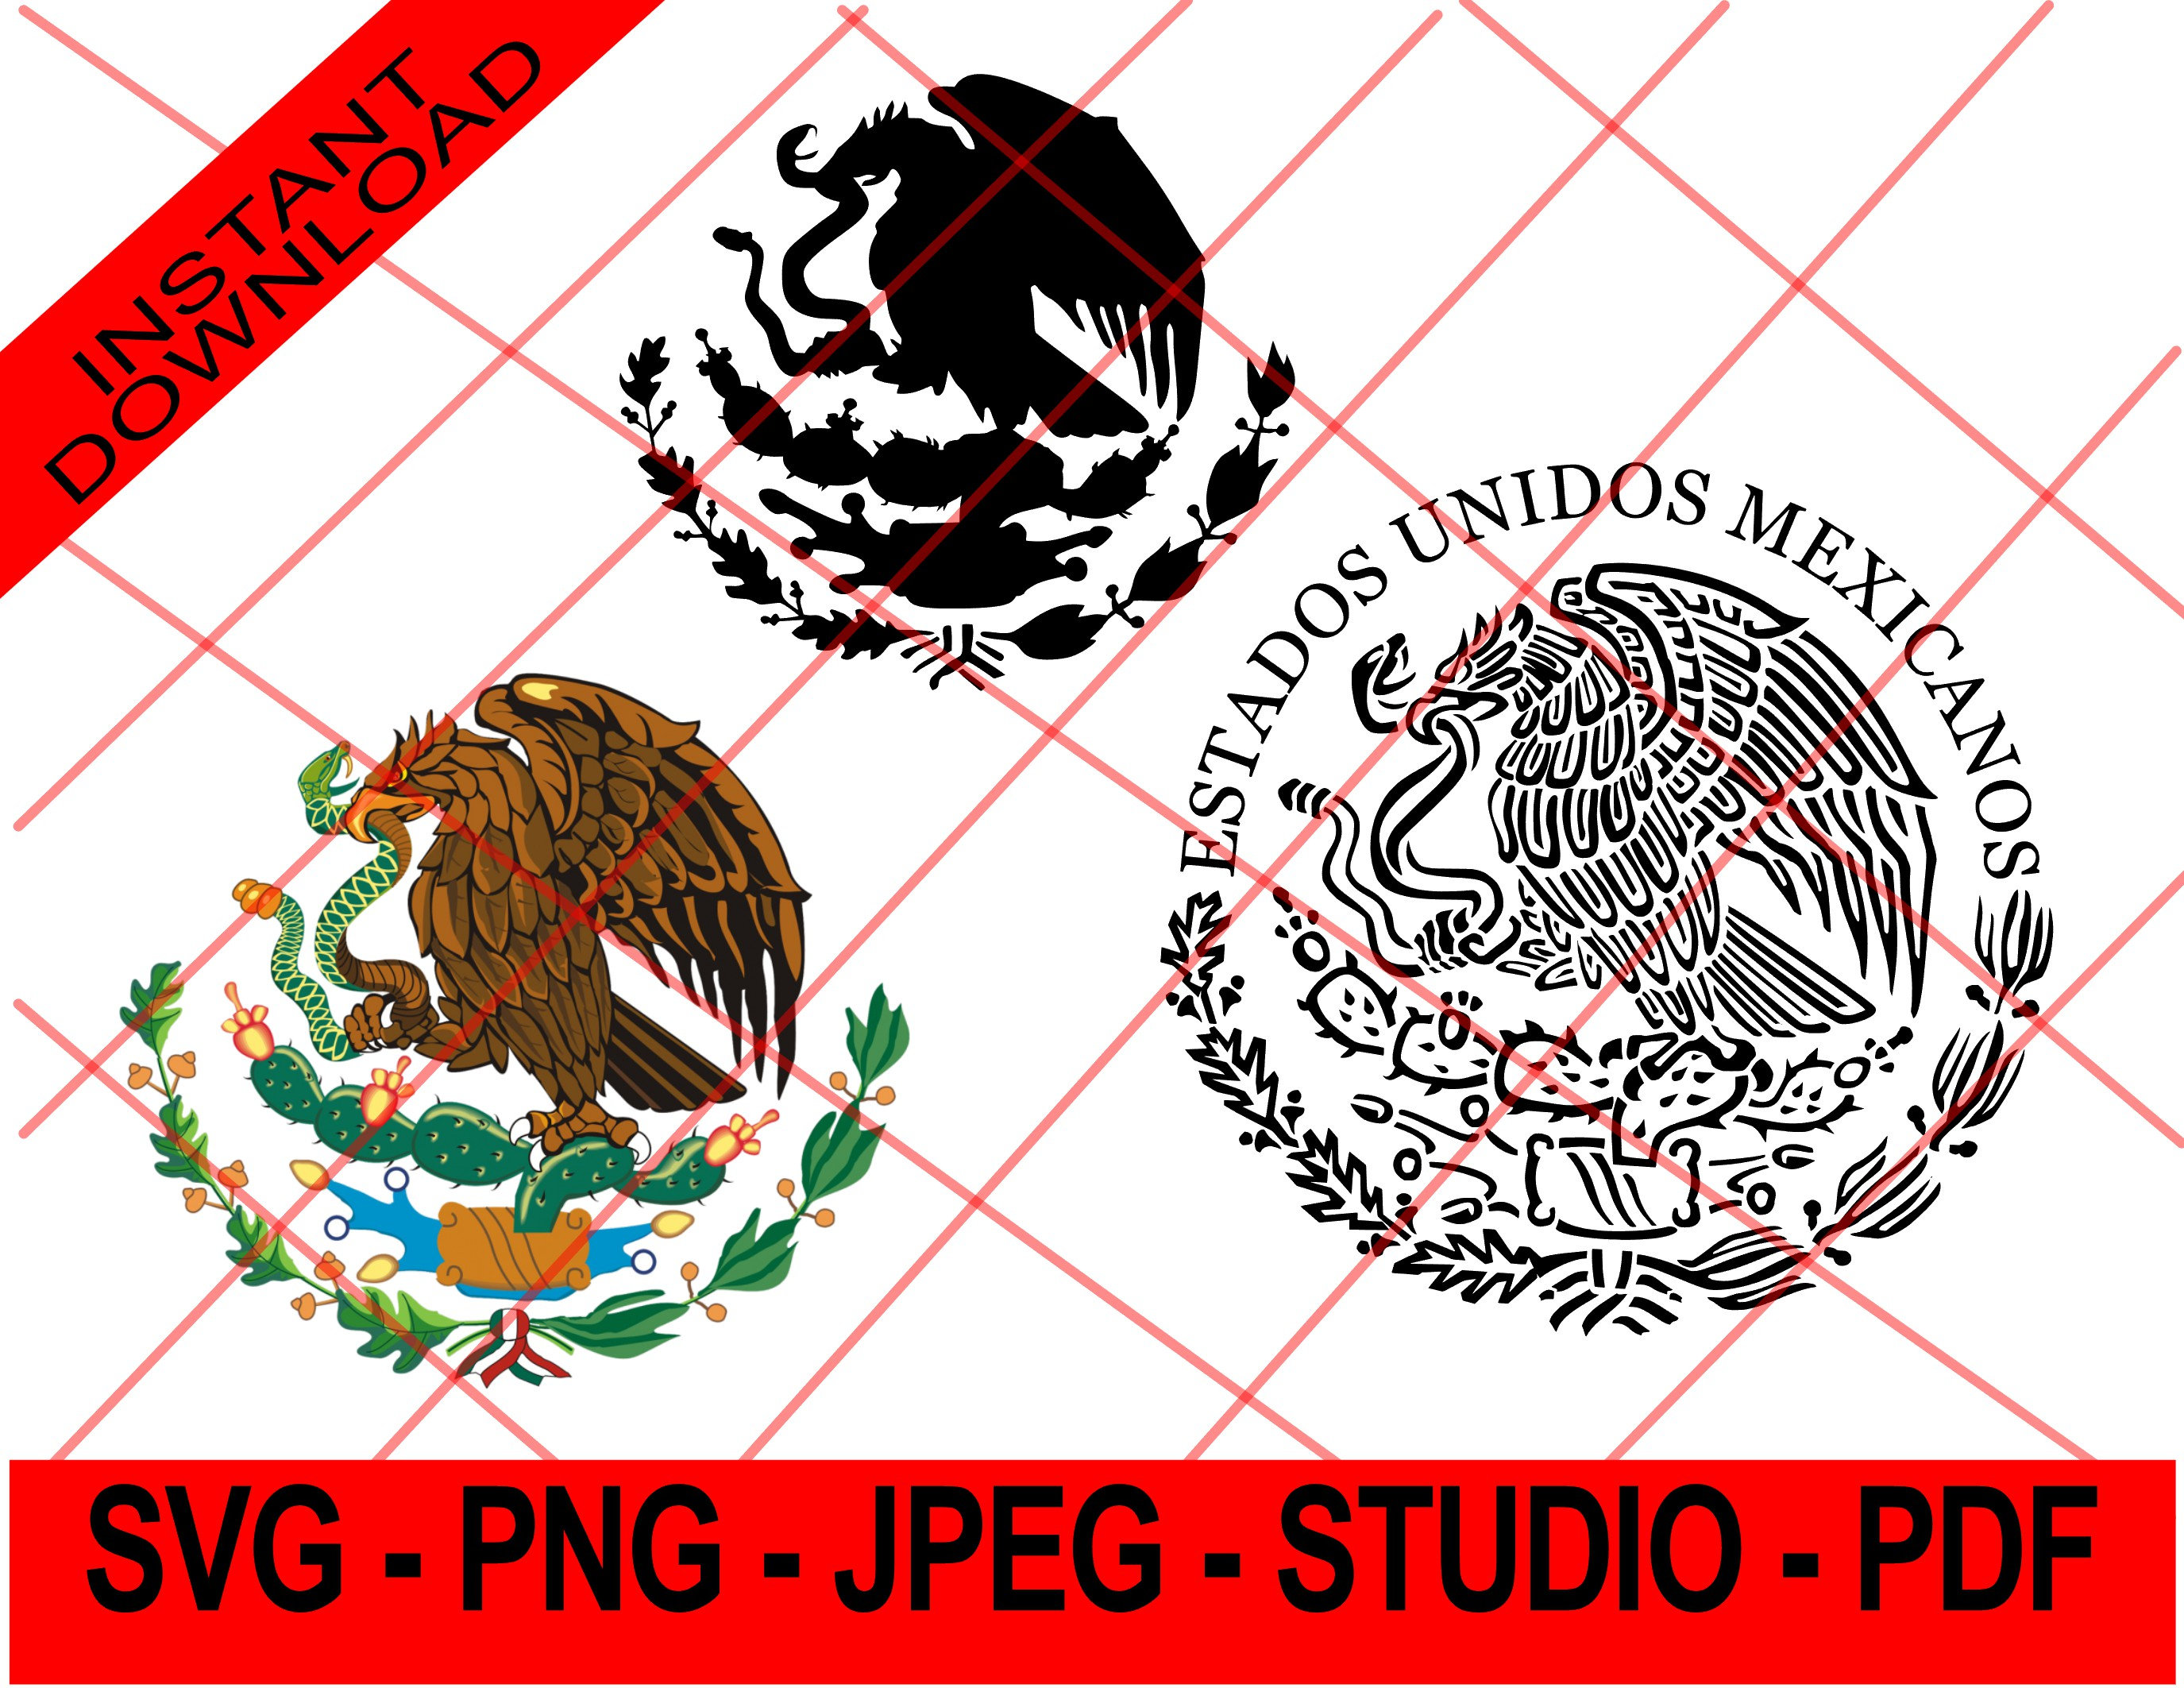 COAT OF ARMS OF MEXICO Logo of Mexico Aguila De Mexico hq nude picture